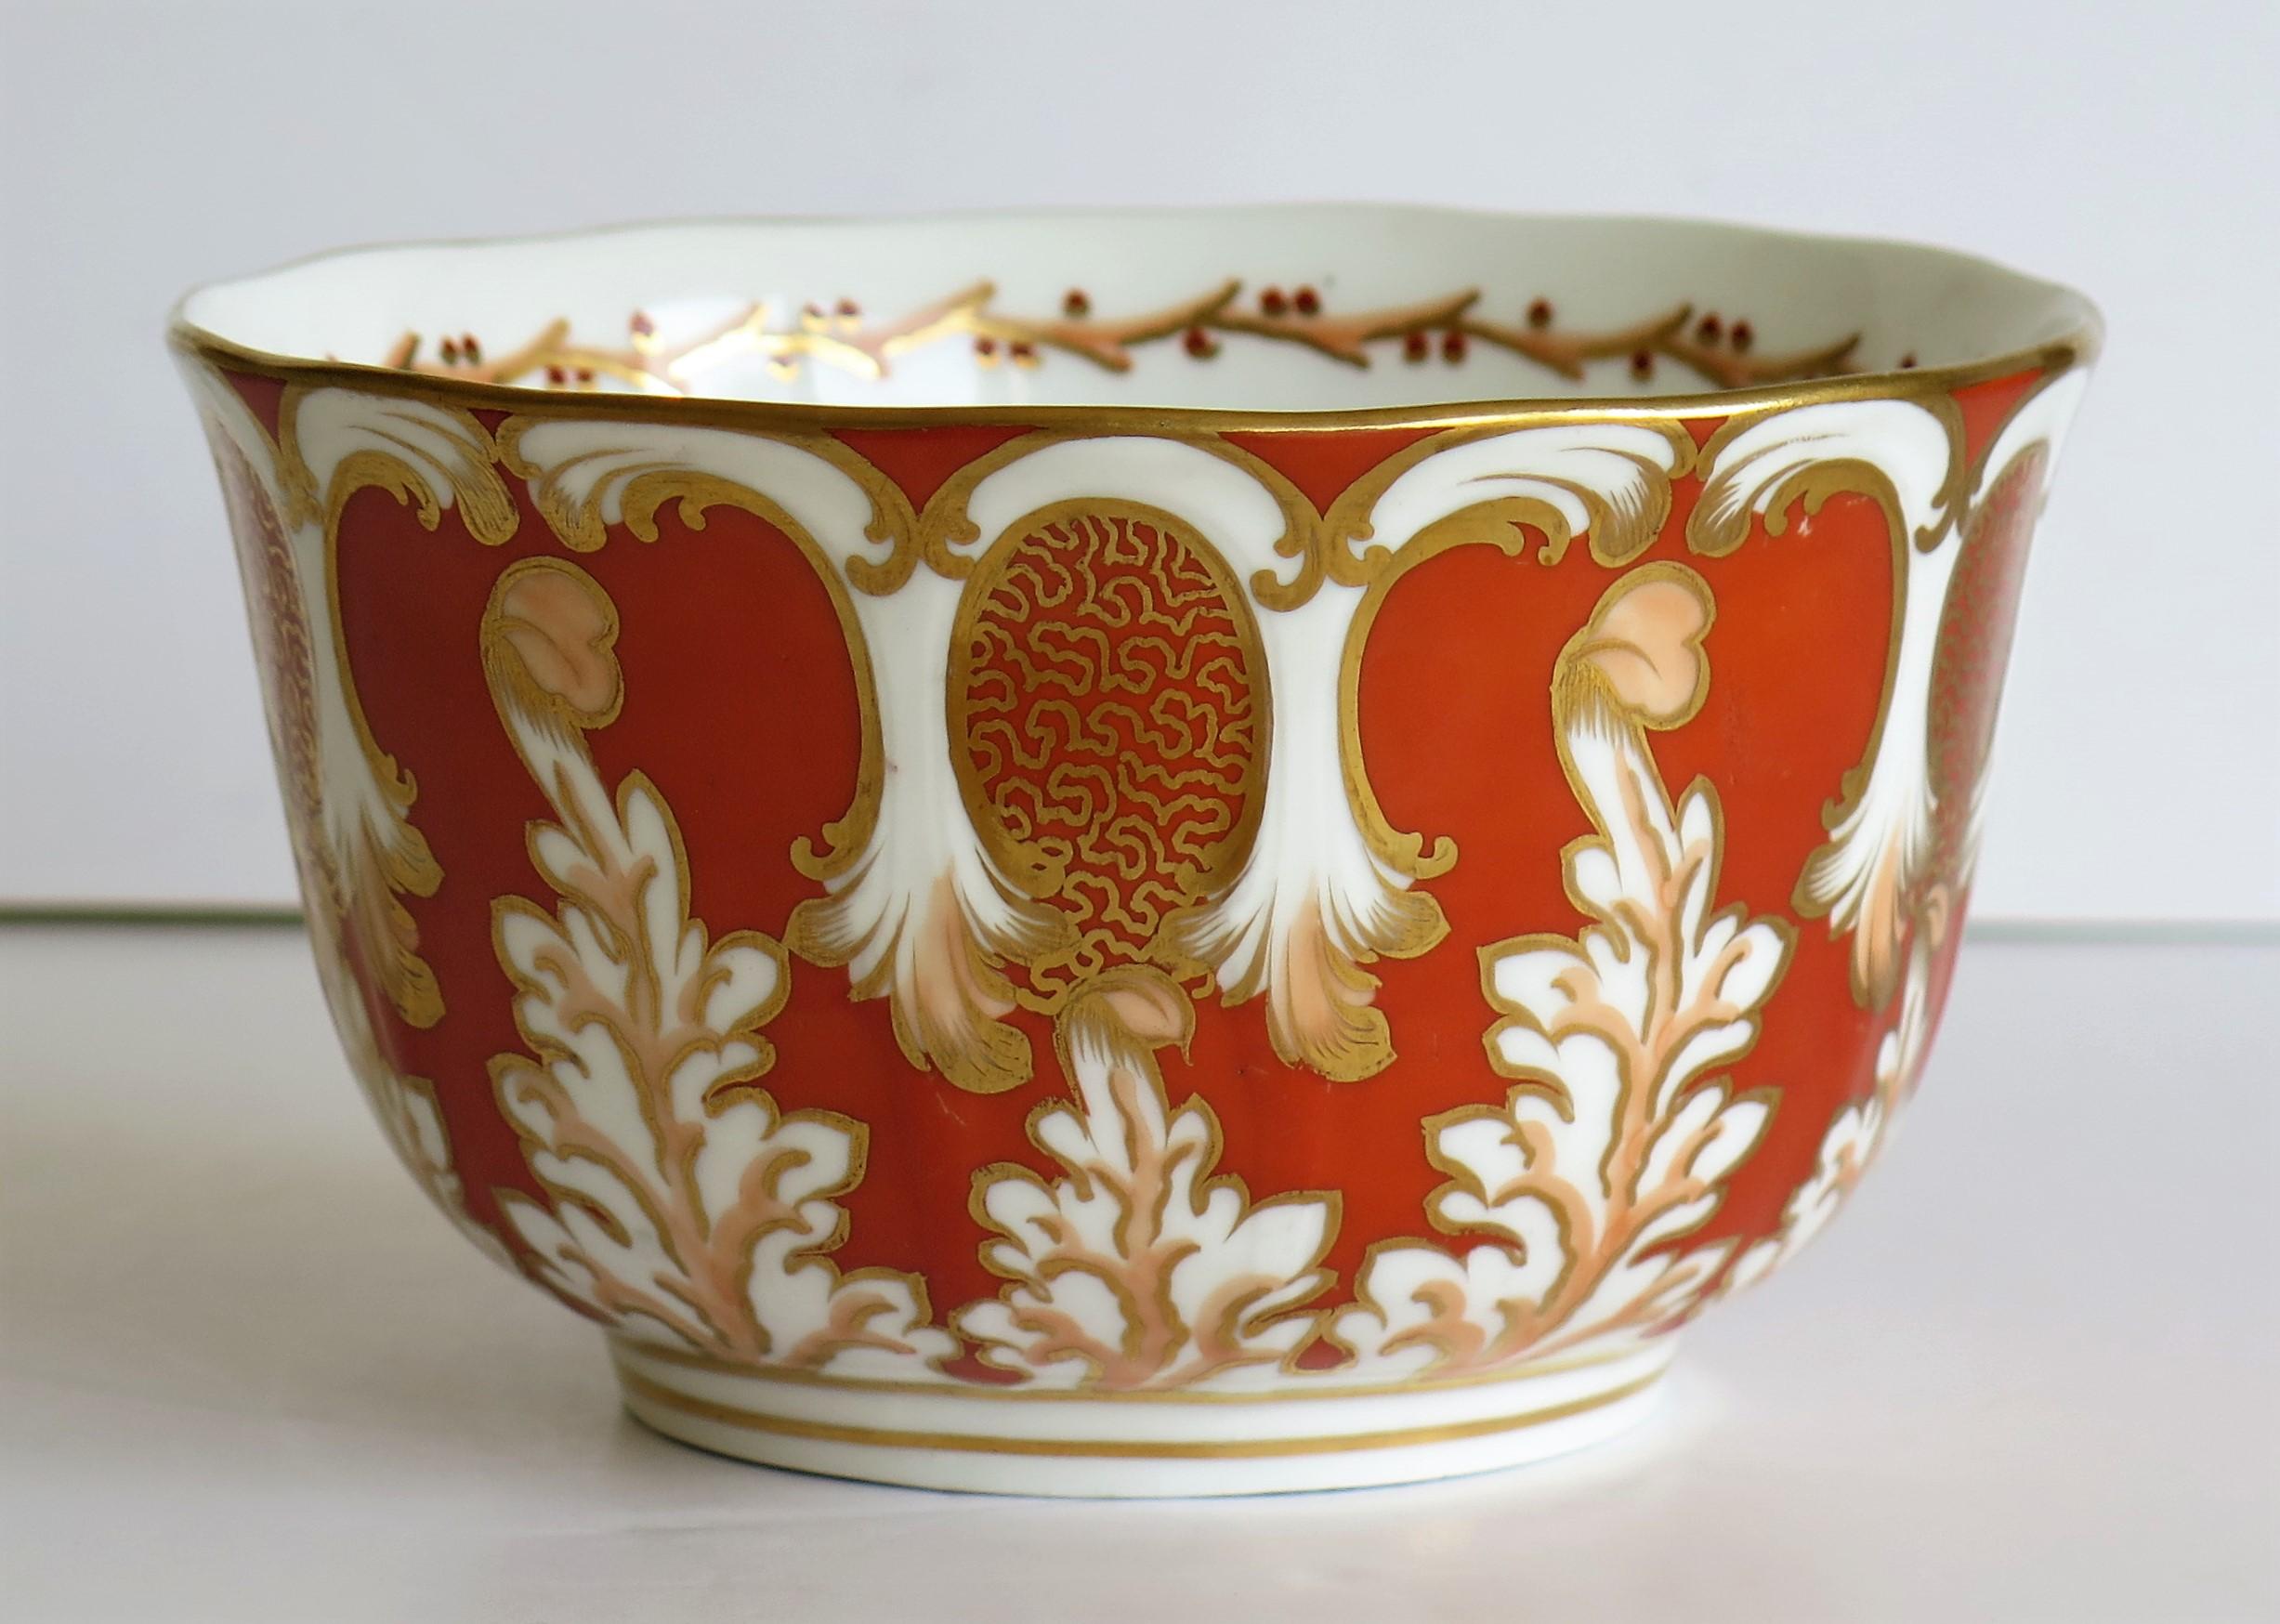 Davenport Porcelain Bowl in Pattern 2144 Fully Marked to Base, English, 1845 2